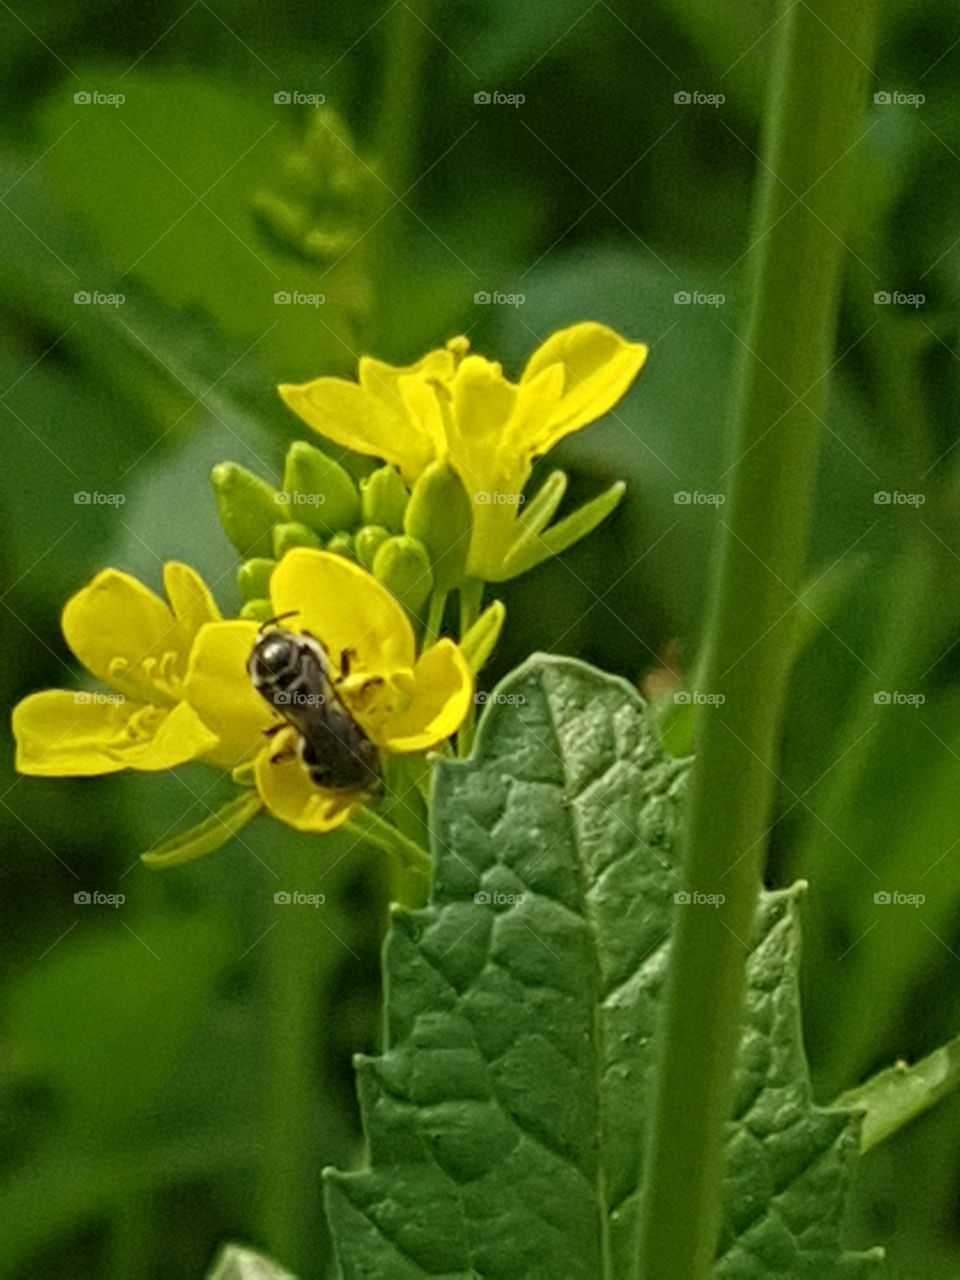 Naturally pic I this is awesome pic of a natural moments of bug on flowers it's so important for eco friendly so can you see this picture carefully and so impressive pic of nature it's so important for human life without this nothing I think .......